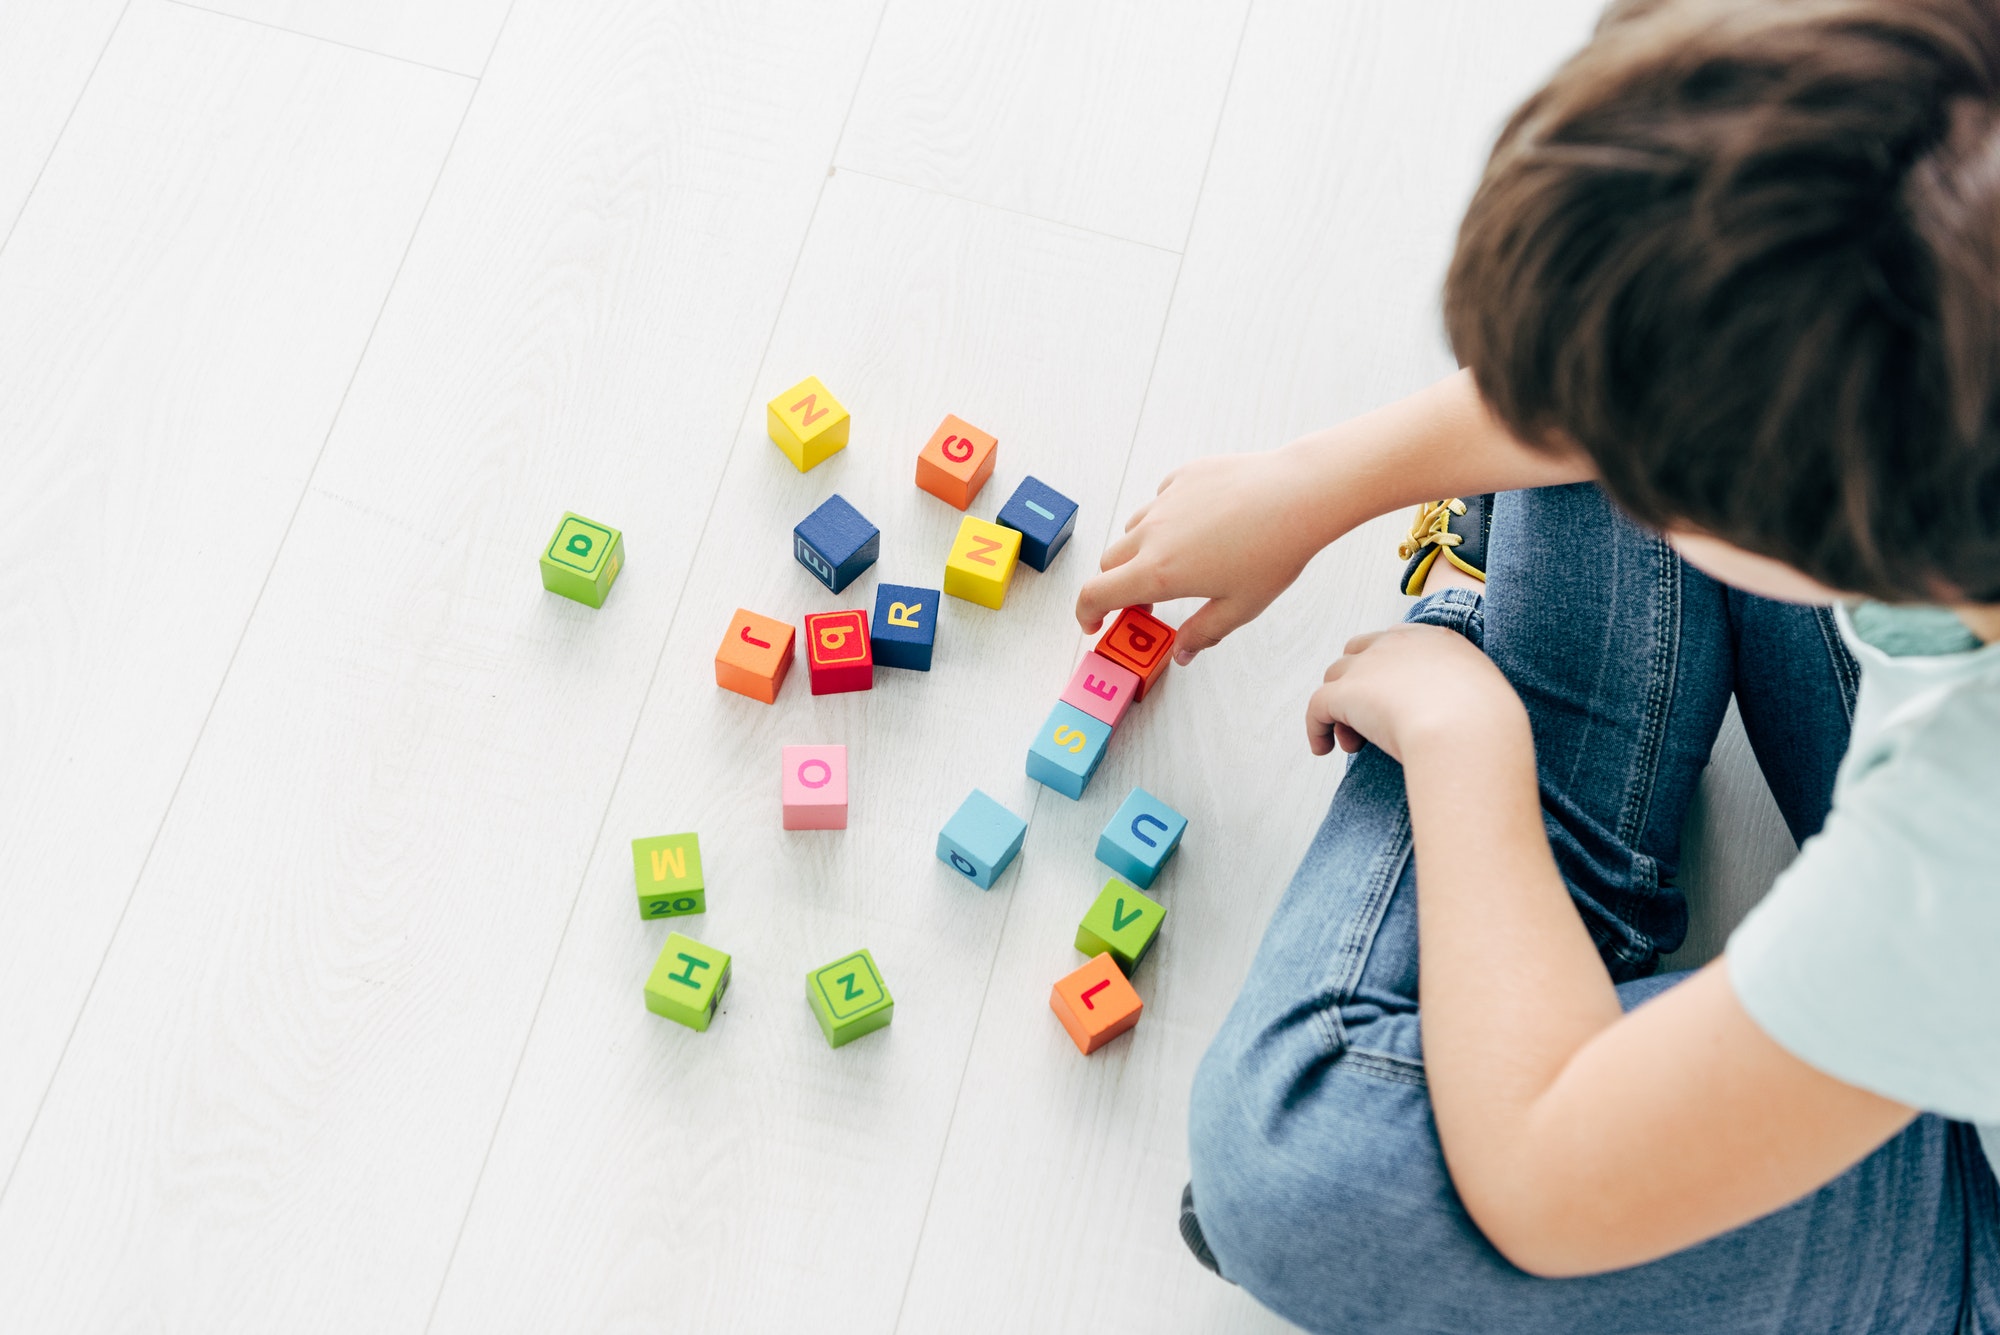 cropped view of kid with dyslexia playing with colorful building blocks